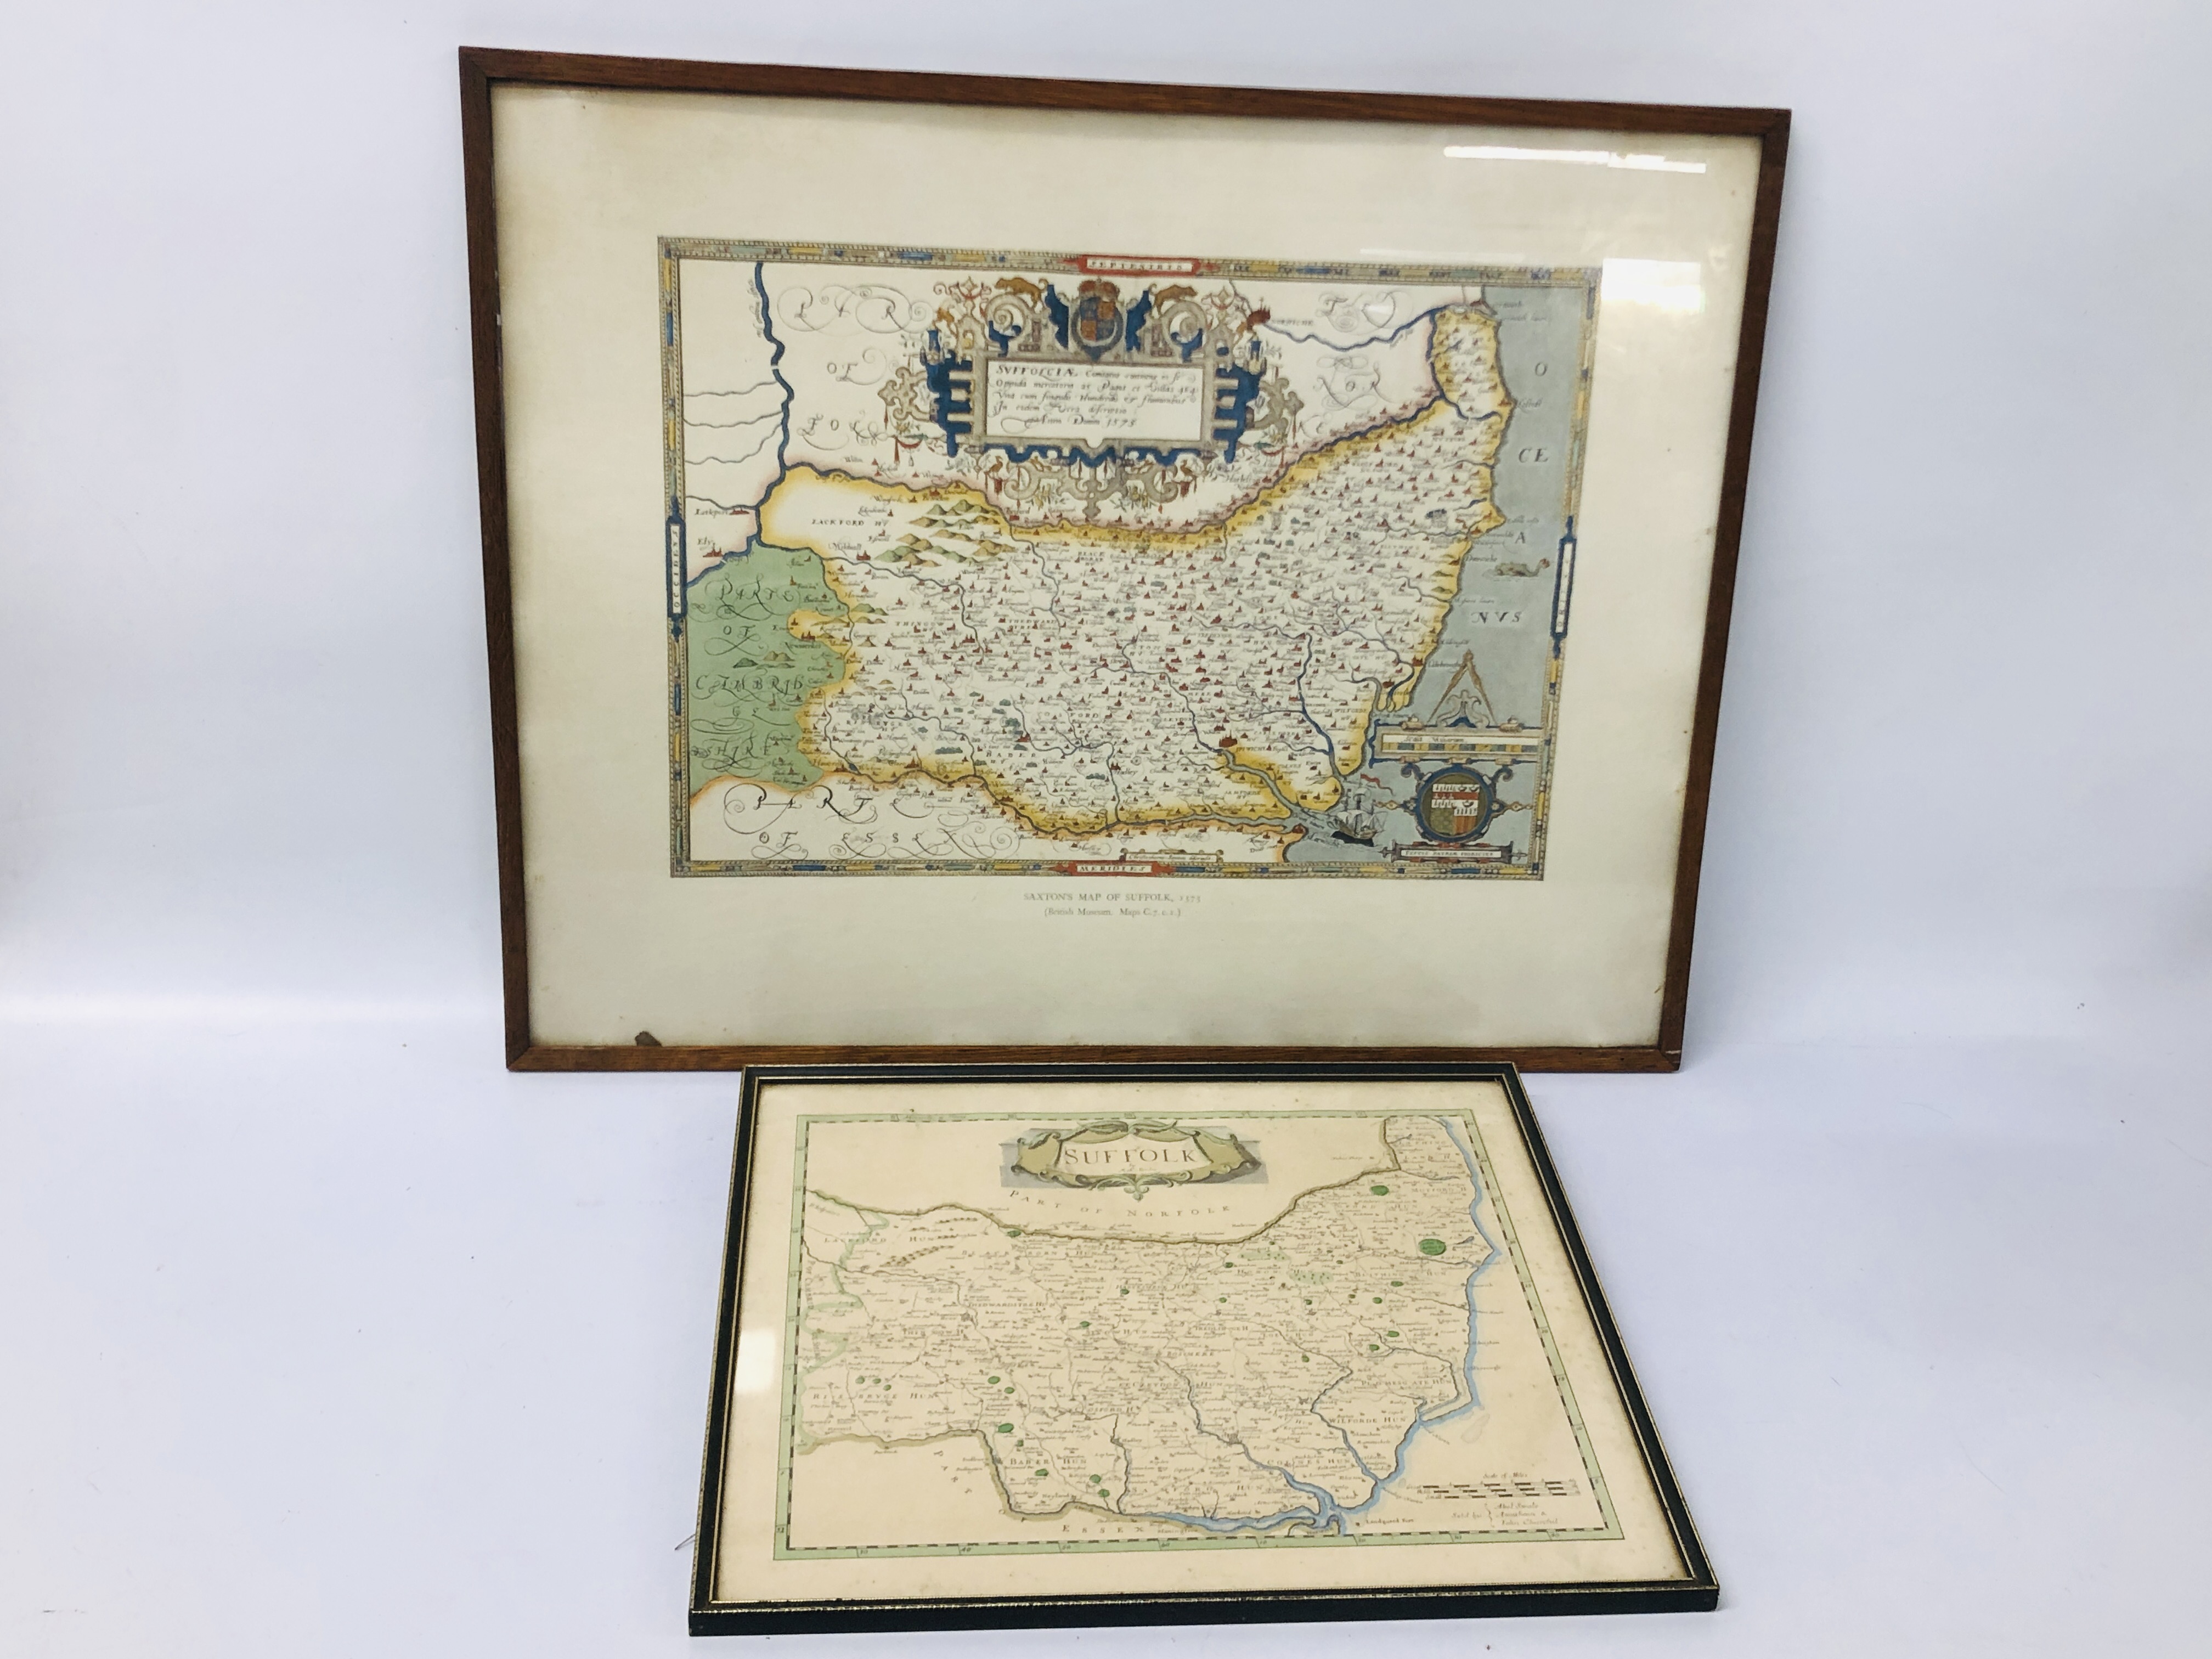 A REPRODUCTION SEXTONS MAP OF NORFOLK ALONG WITH A MORDENS MAP OF SUFFOLK